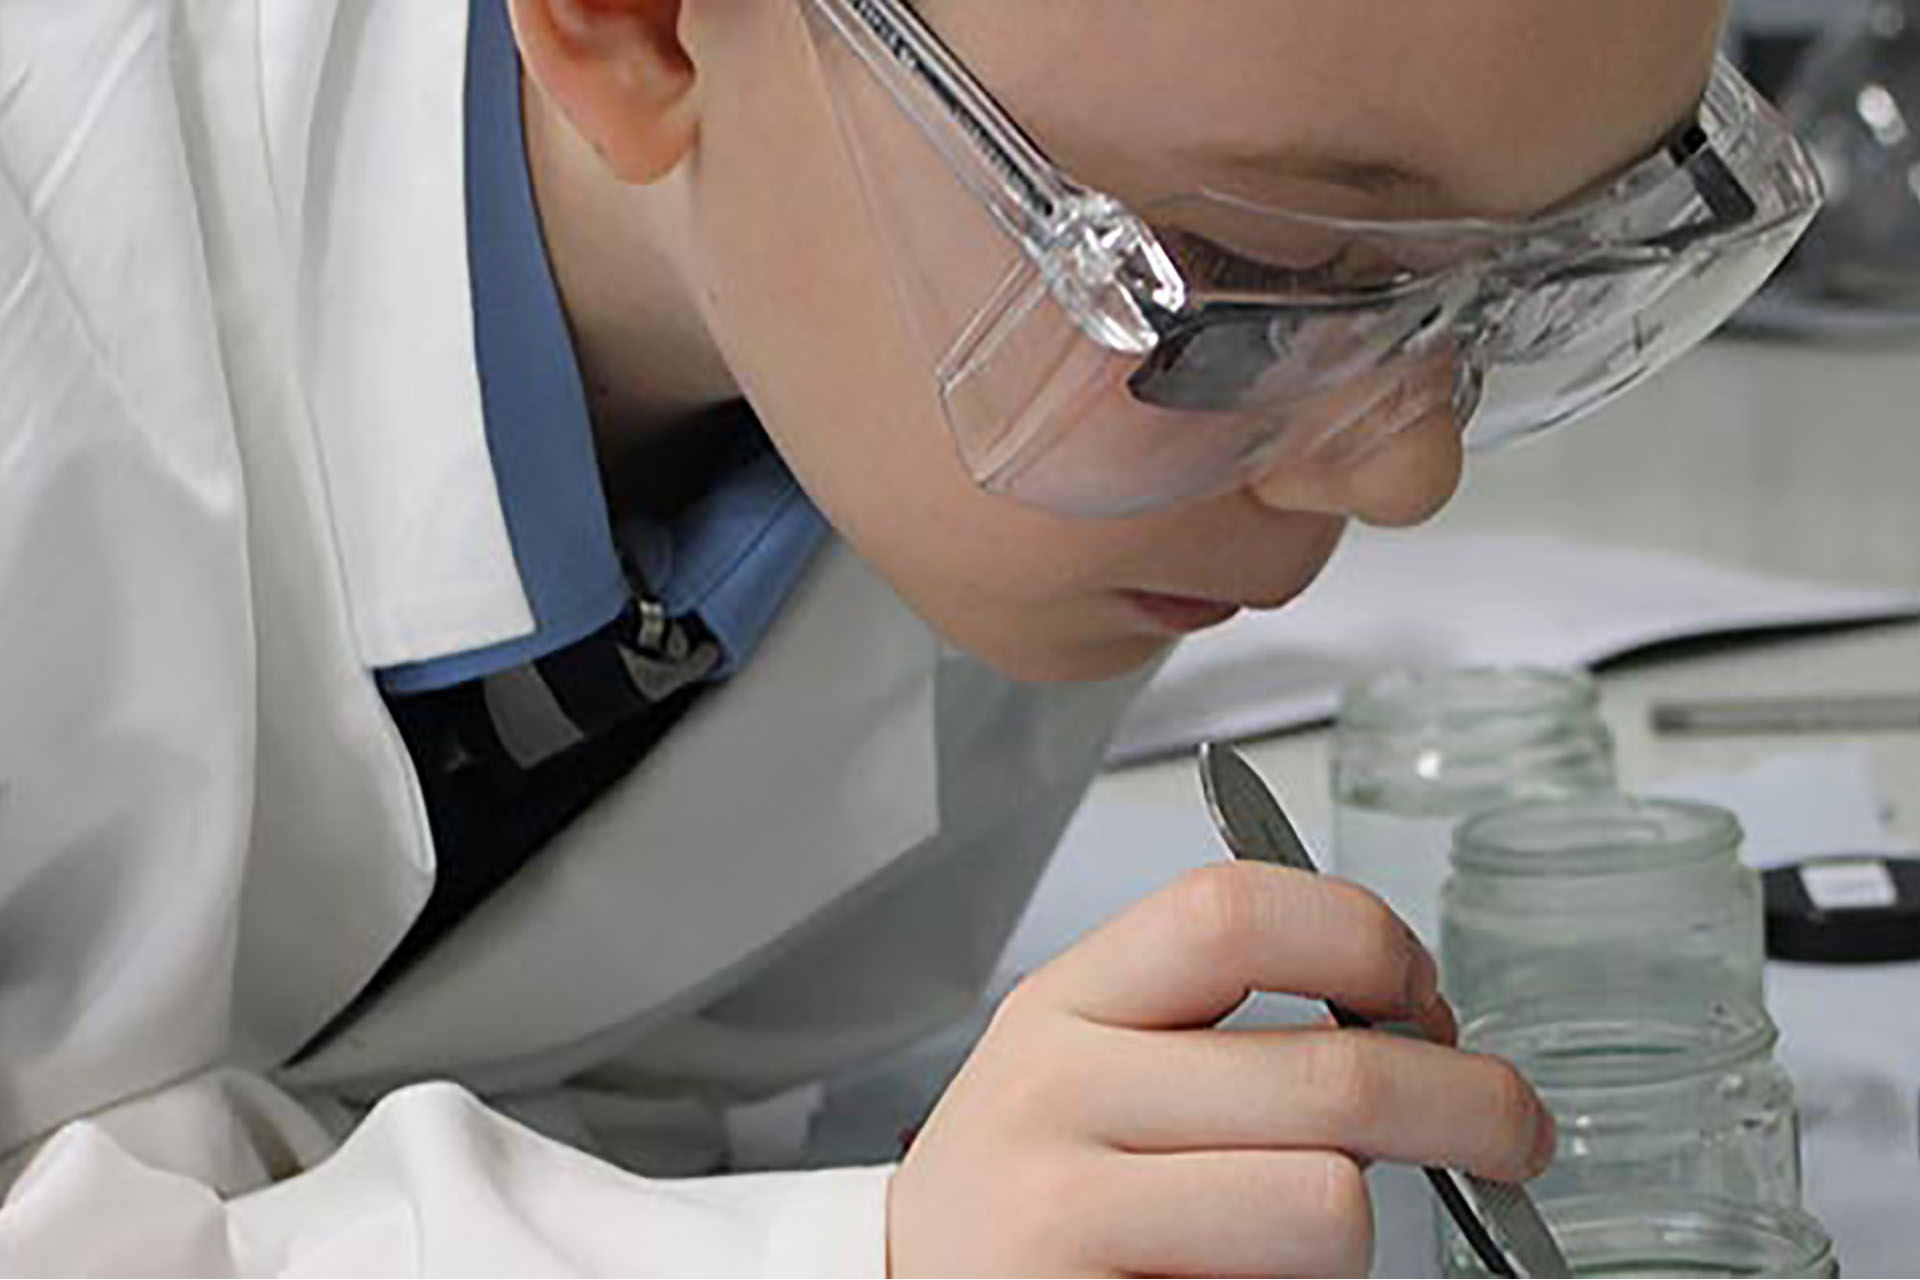 School student doing a lab activity